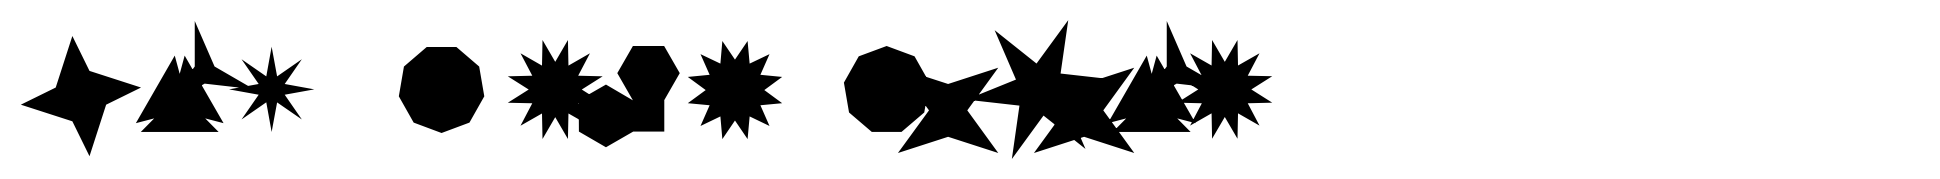 Ingy Star Tilings